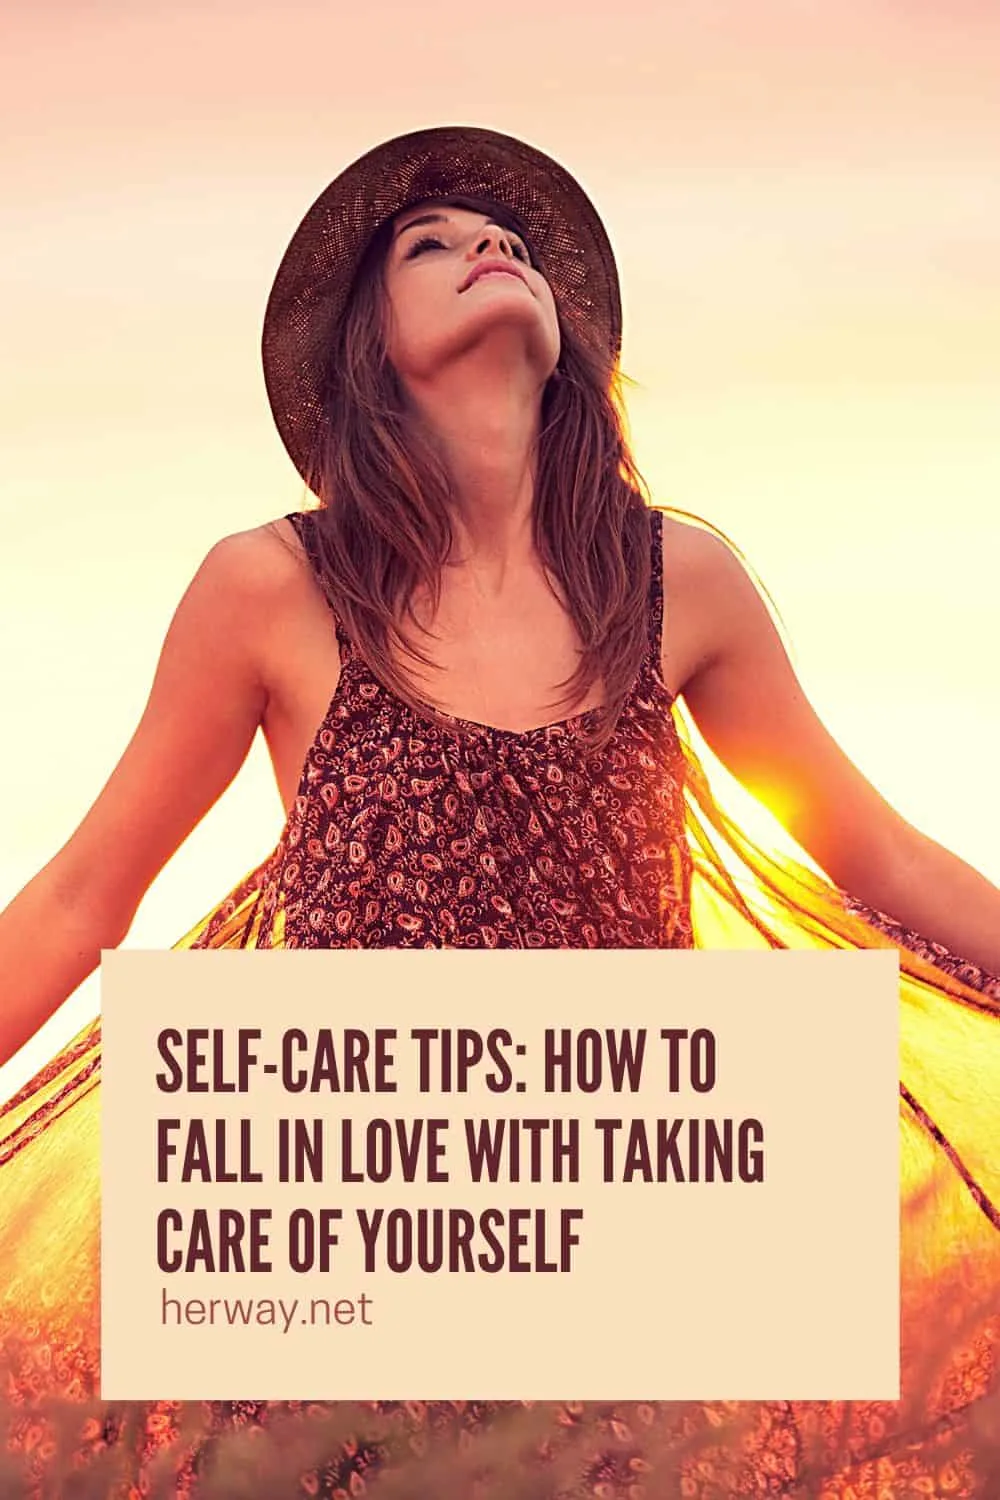 Self-Care Tips: How To Fall In Love With Taking Care Of Yourself